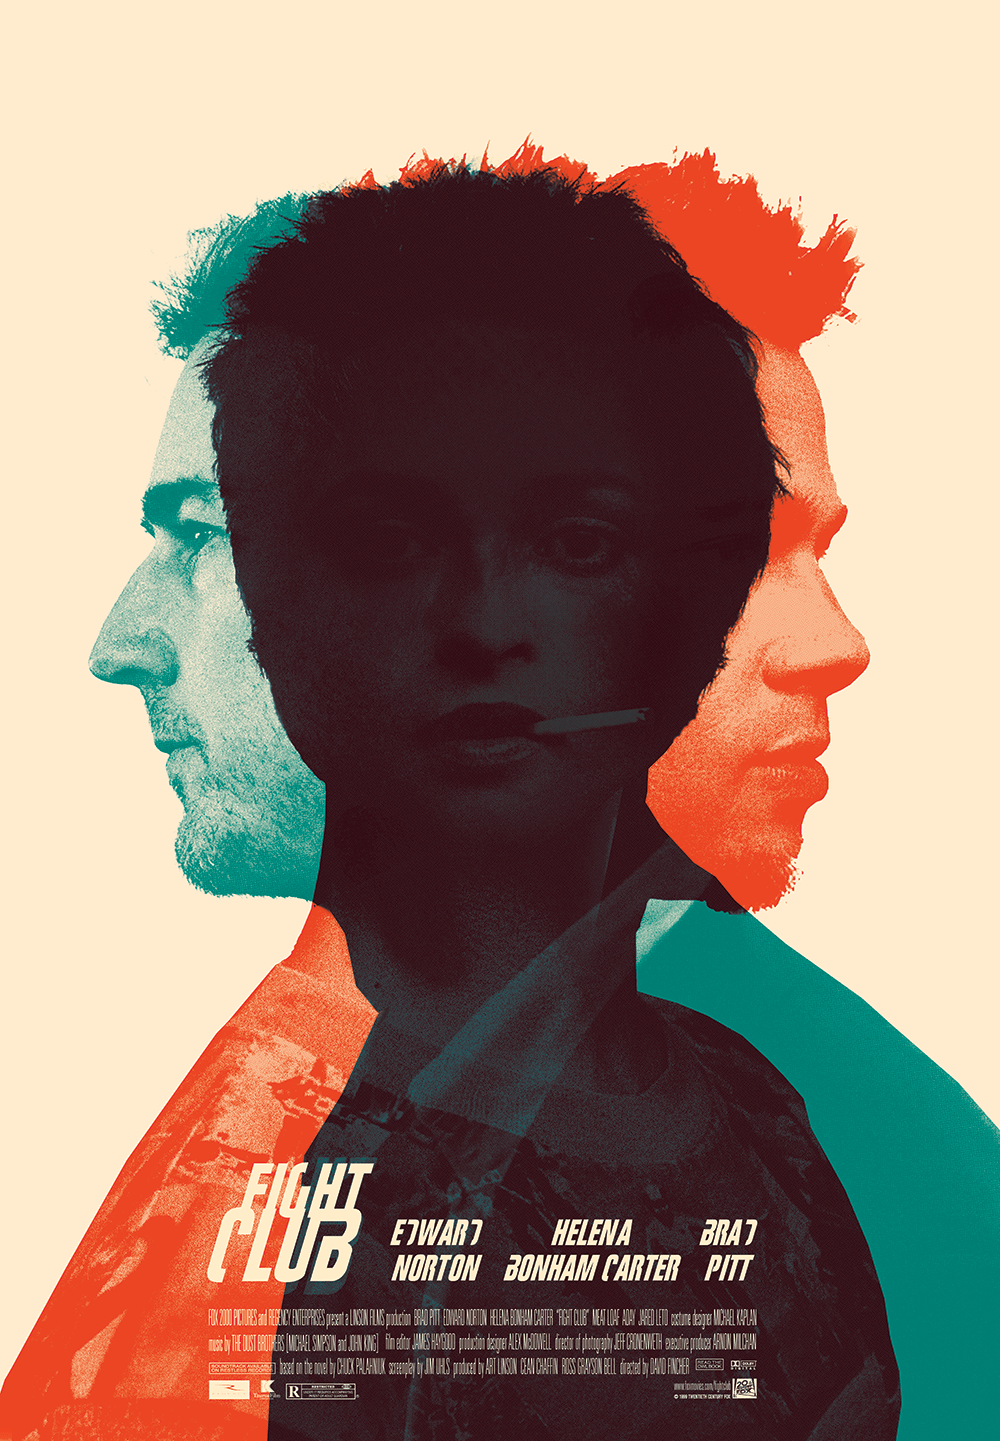 Alternative Movie Posters: New Wave of Visual